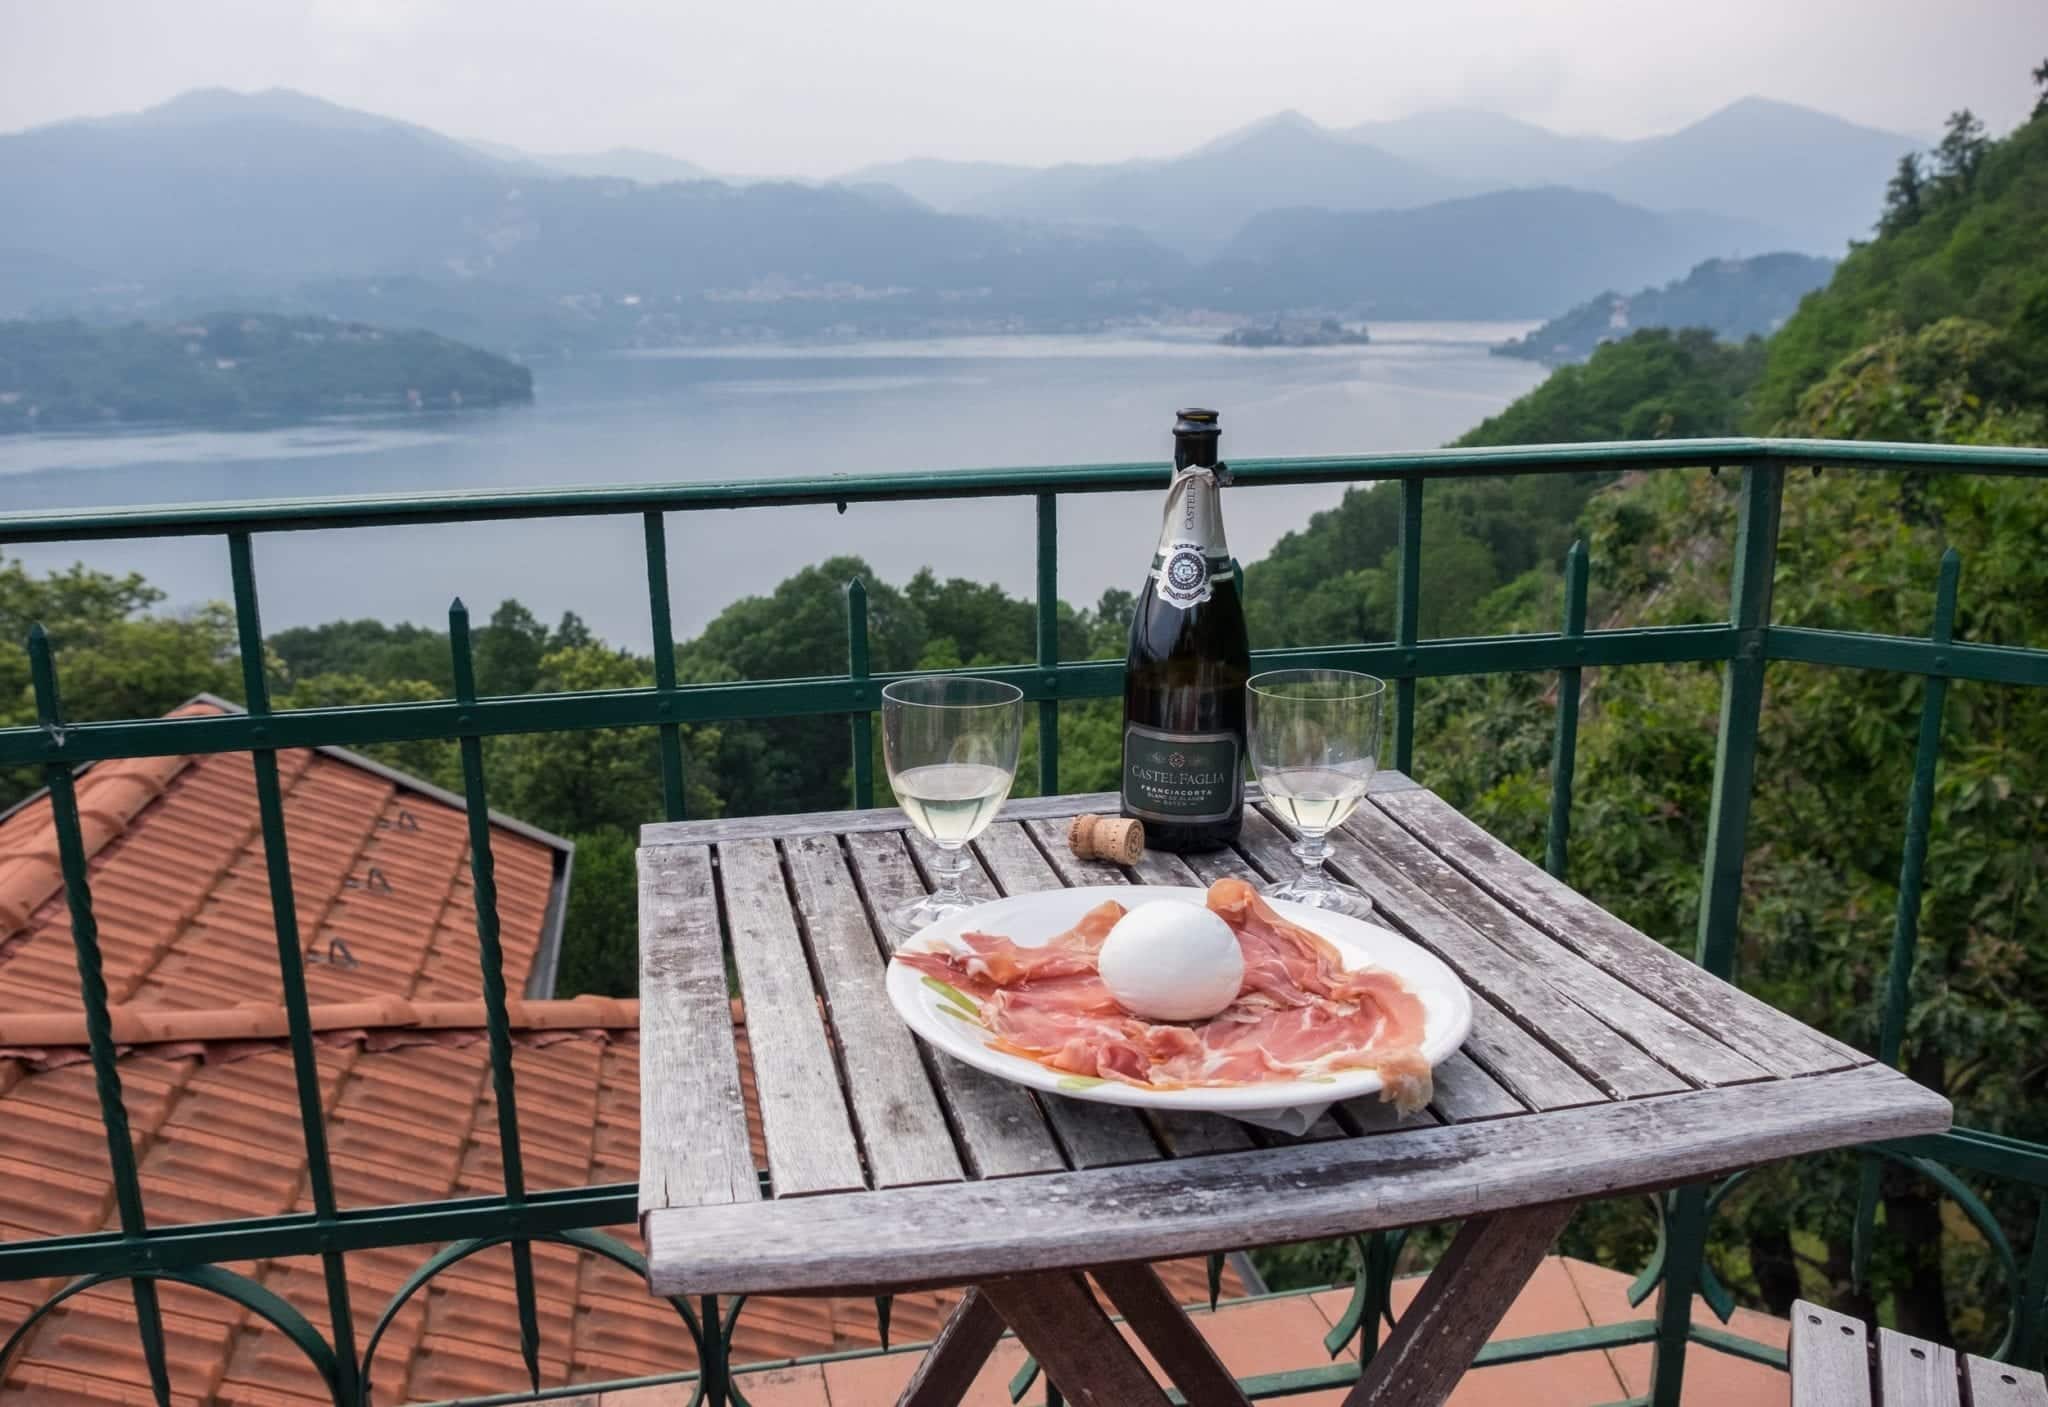 A terrace overlooks a blue and gray misty Lake Orta in the distance, mountains rising up over the lake. In the foreground there is a weathered wooden table. On it is a plate covered with prosciutto and a ball of burrata cheese; behind it are a bottle of Franciacorta sparkling white wine and two goblets filled with the wine.